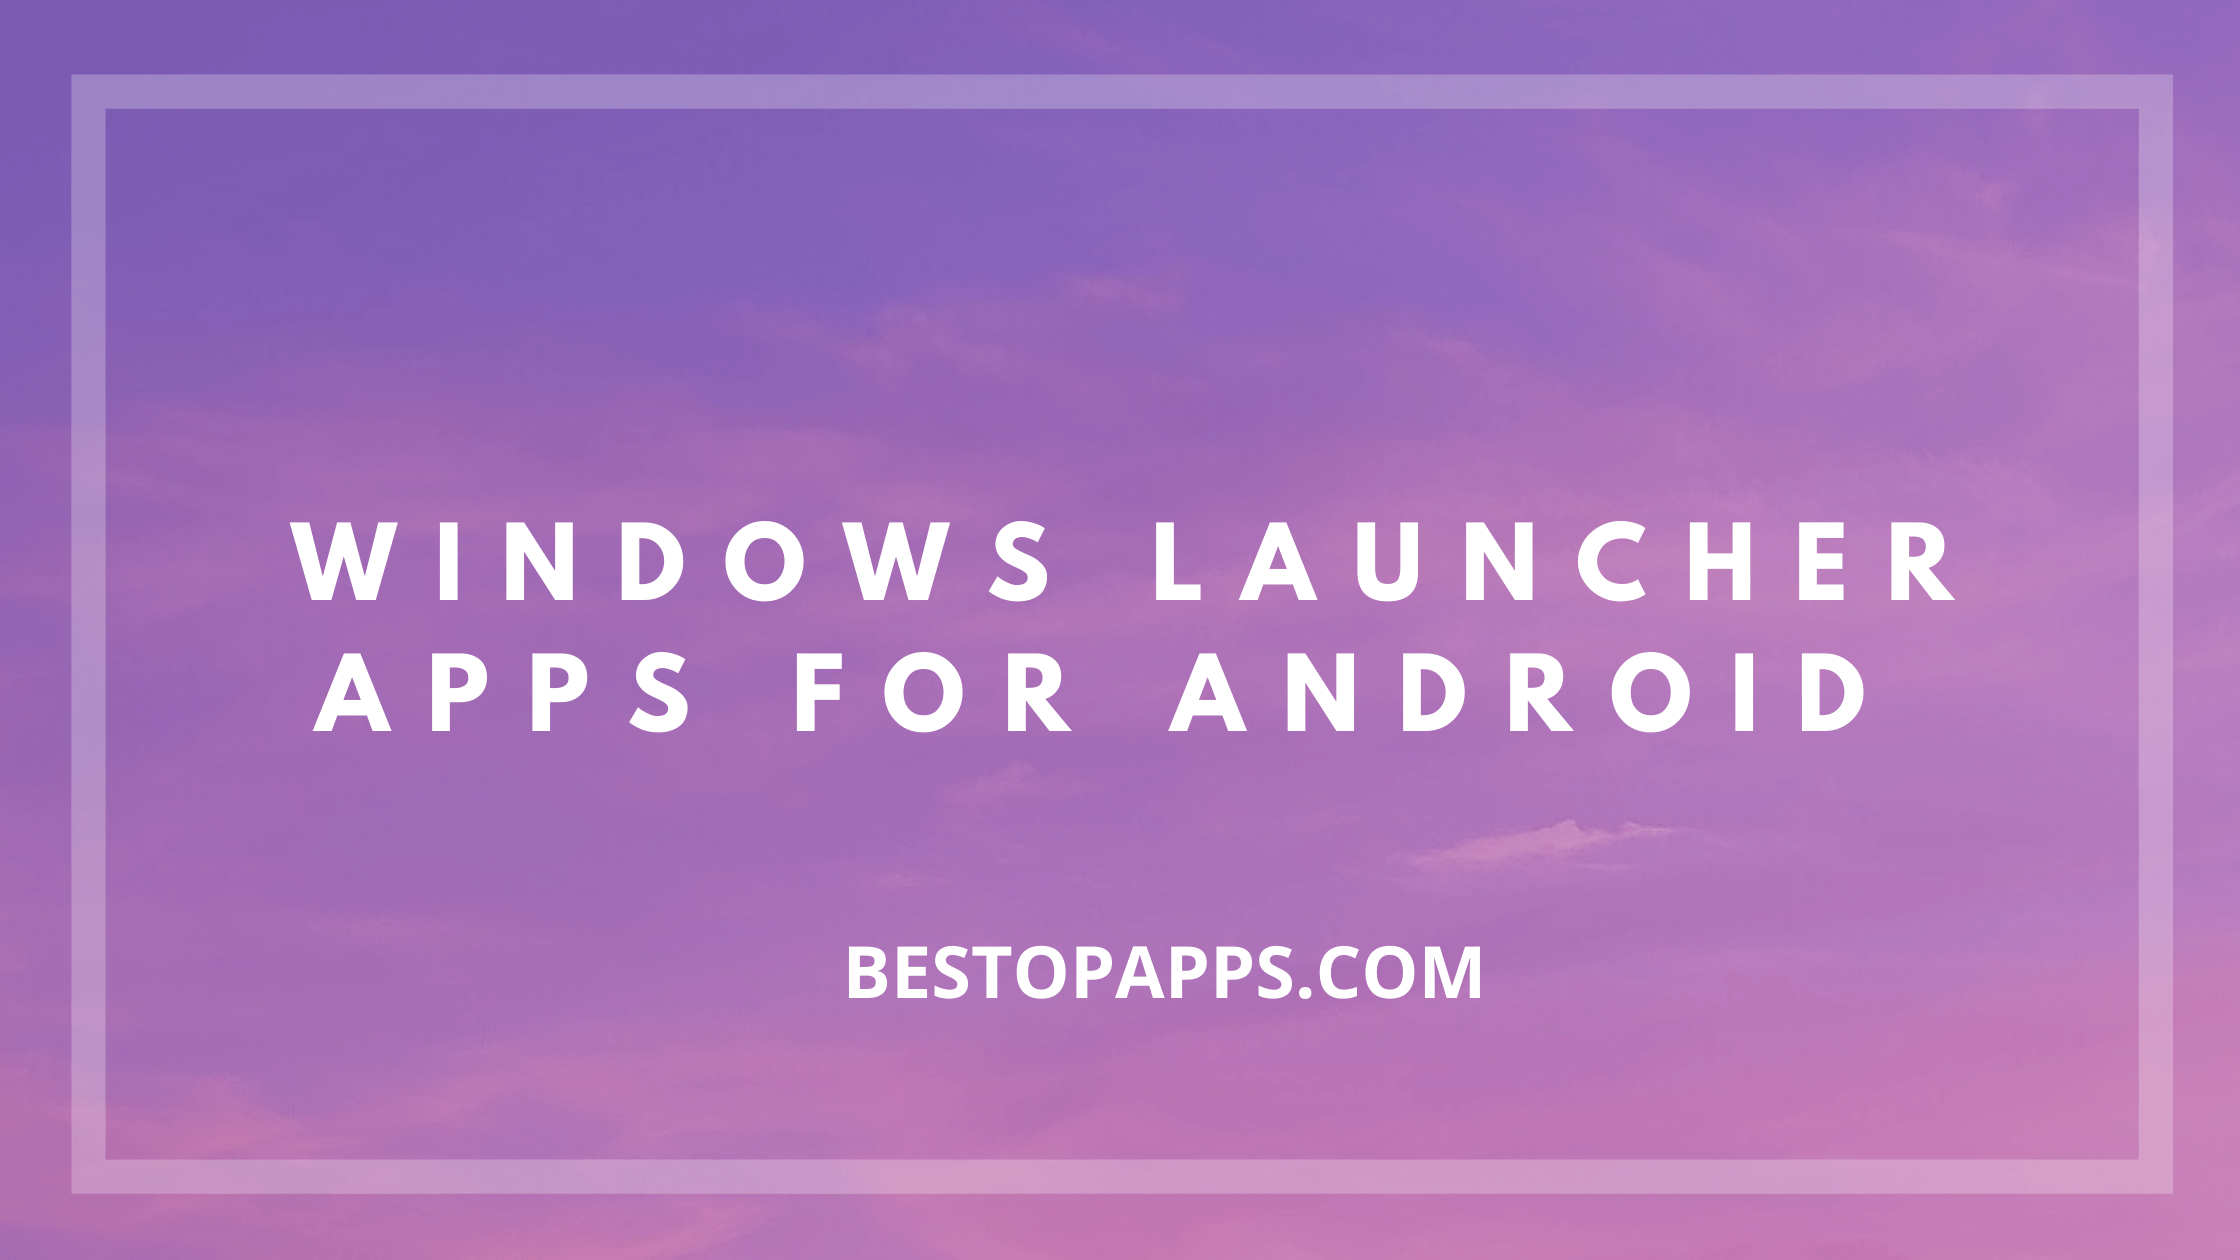 Windows Launcher Apps for Android